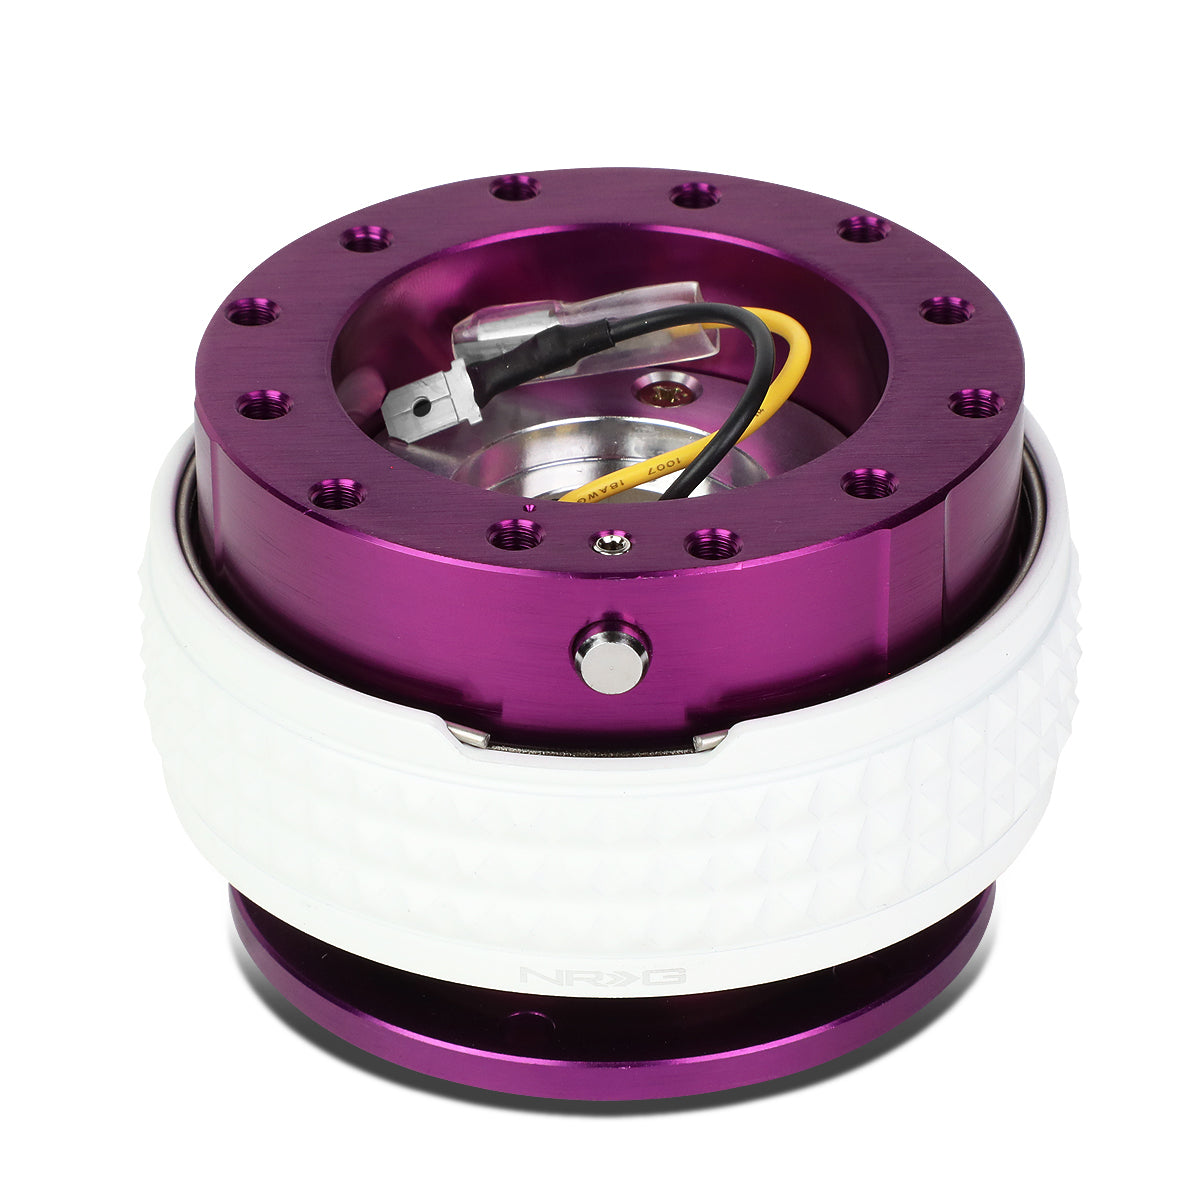 NRG Innovations Quick Release 2.1 Pyramid Series SRK-210PP/GL